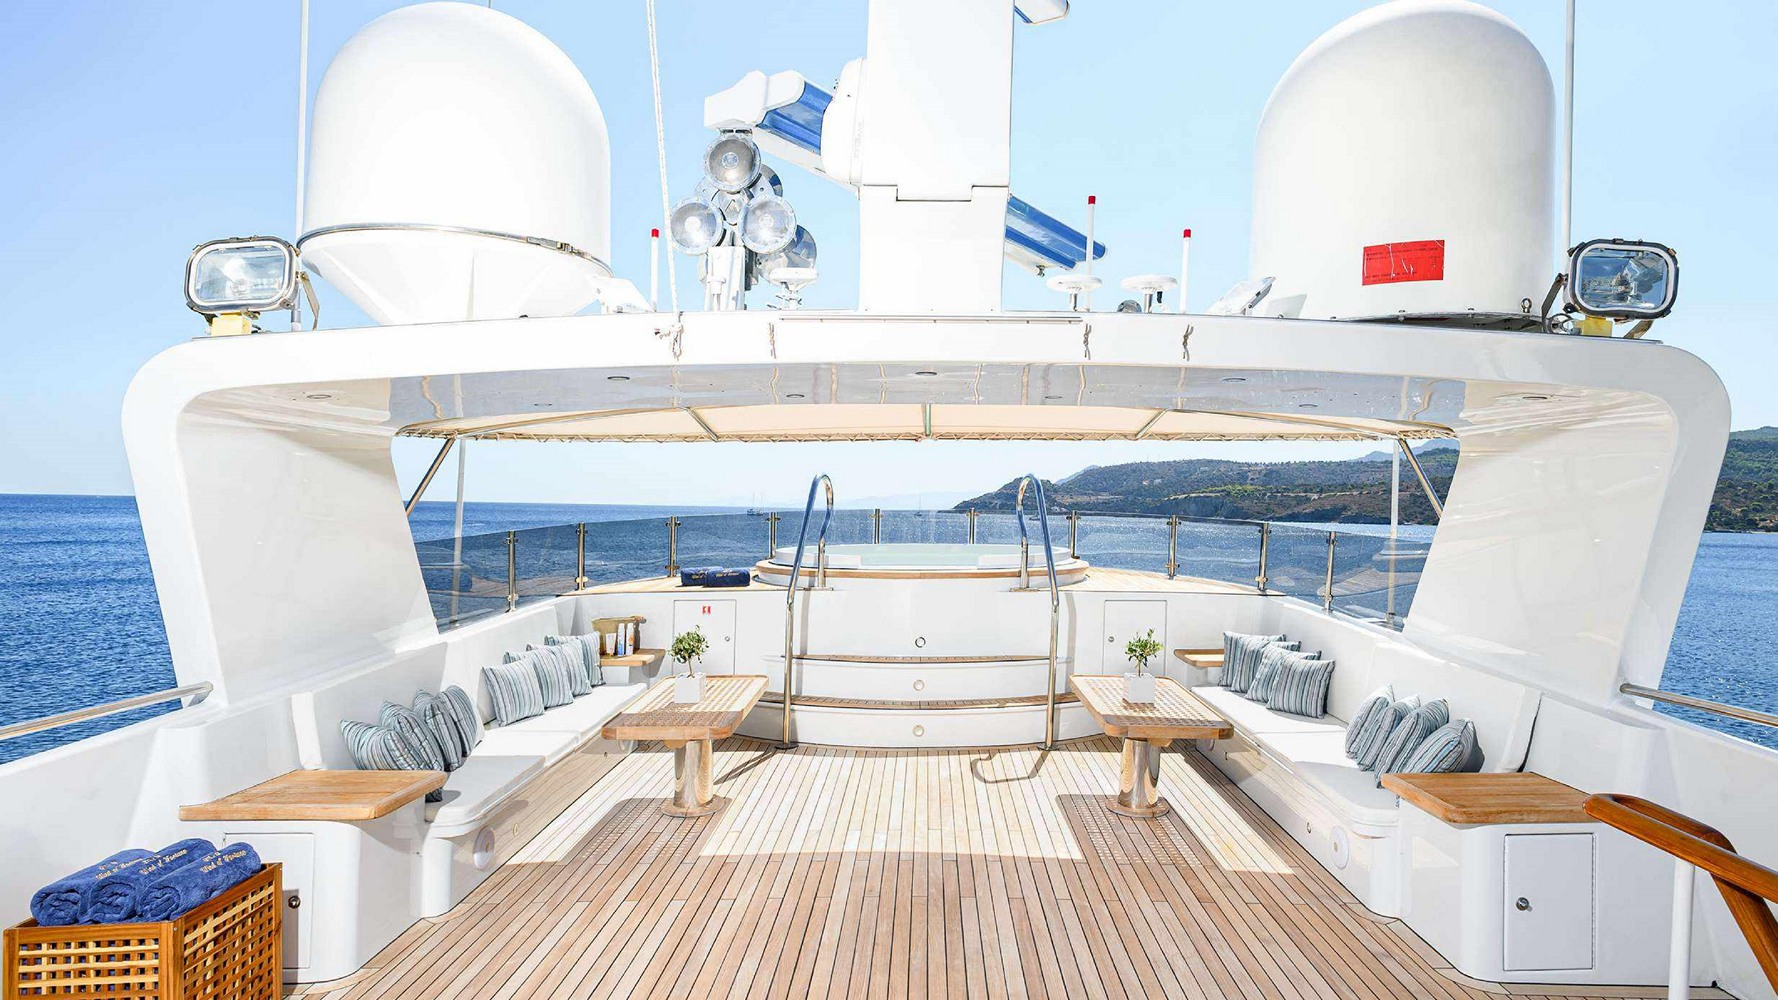 View of the deck of a large yacht